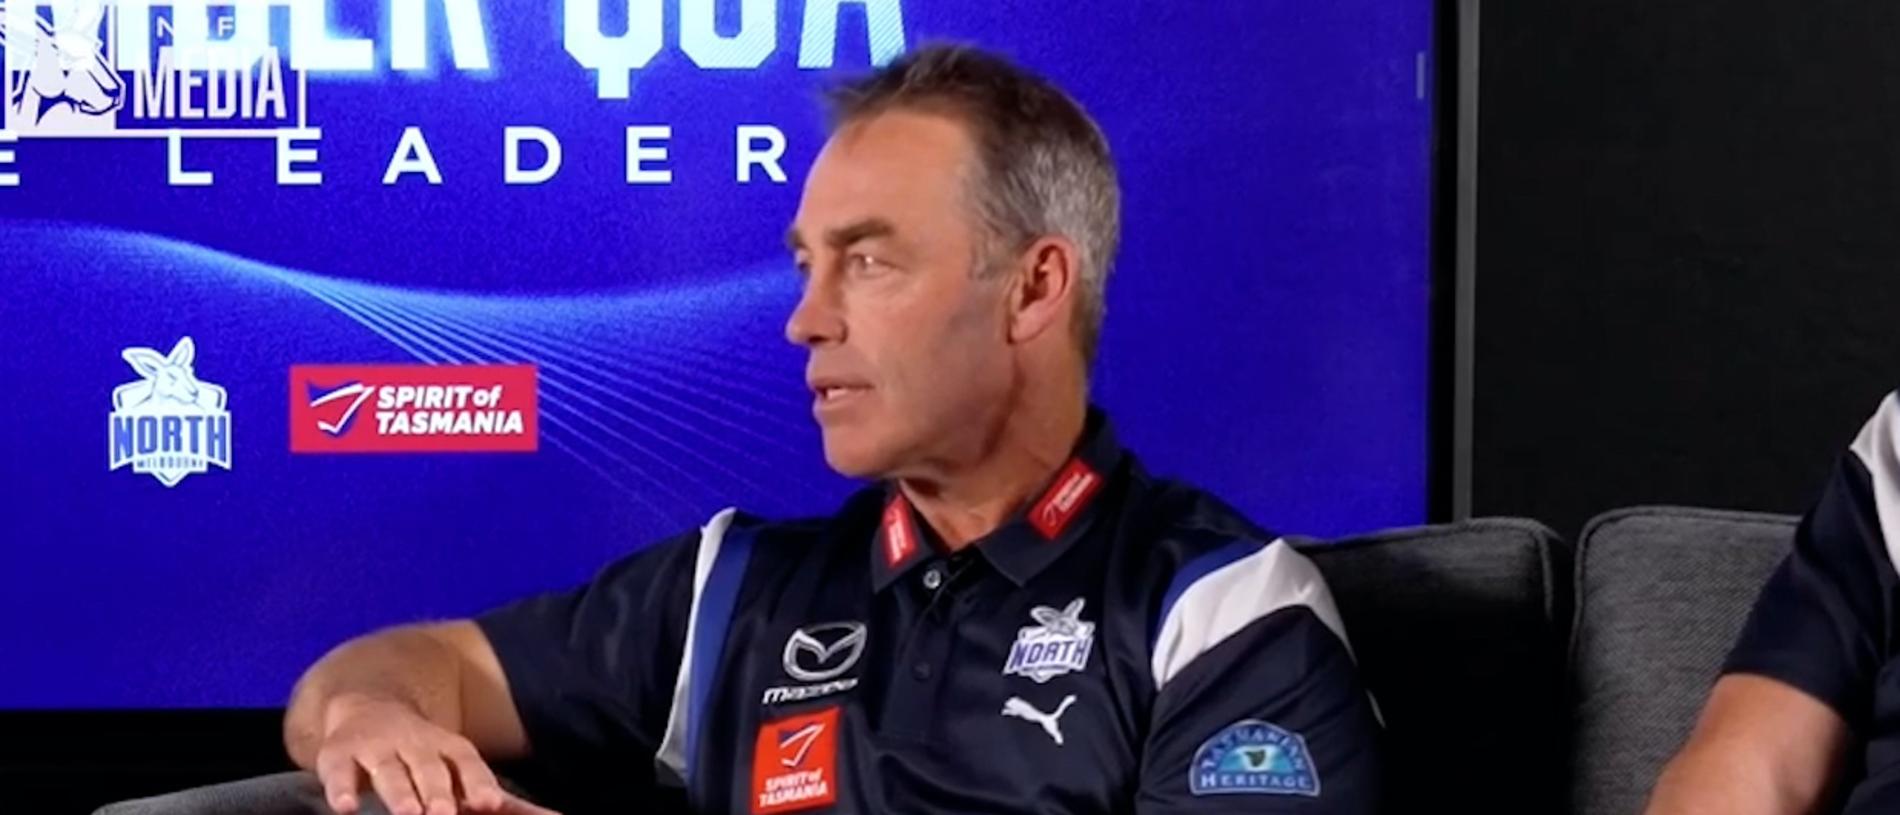 Alastair Clarkson responds in the video to North members